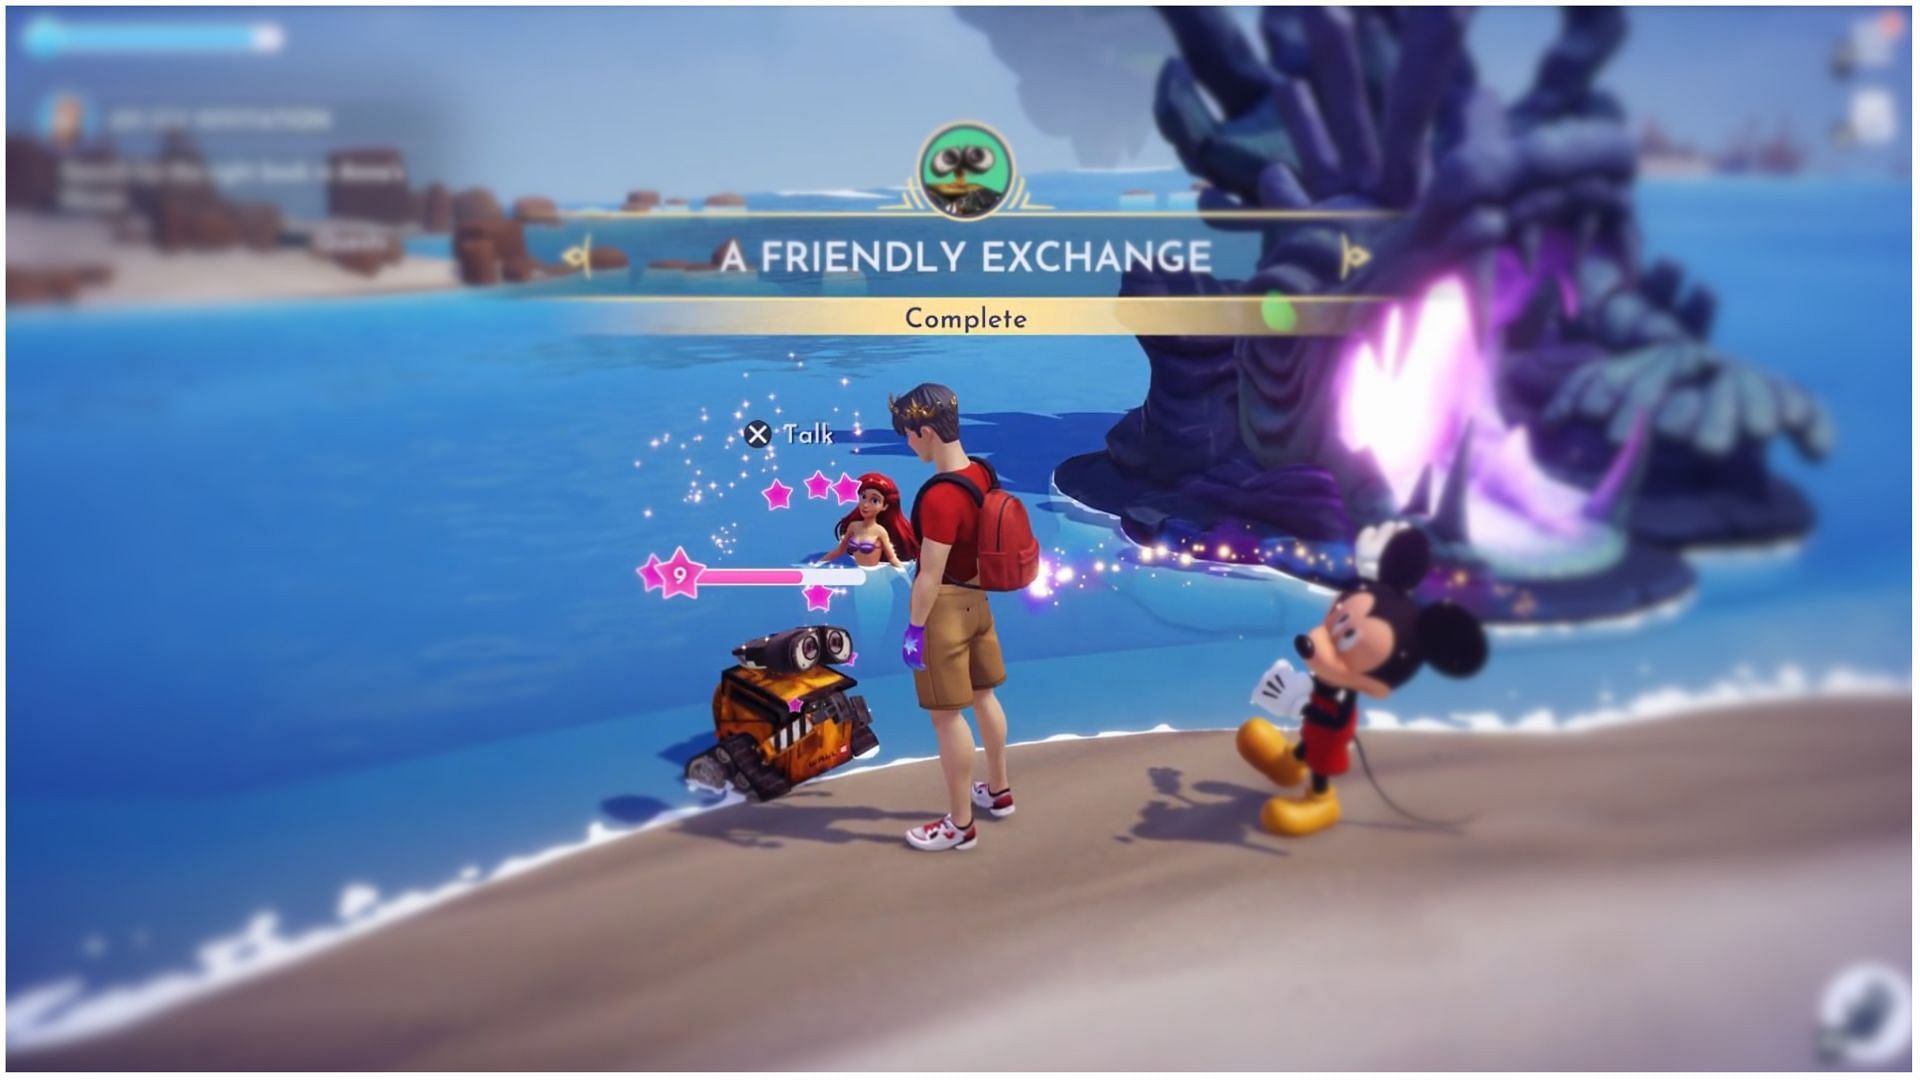 A friendly exchange is a quest in Disney Dreamlight Valley (Image via Youtube - Game Gem)